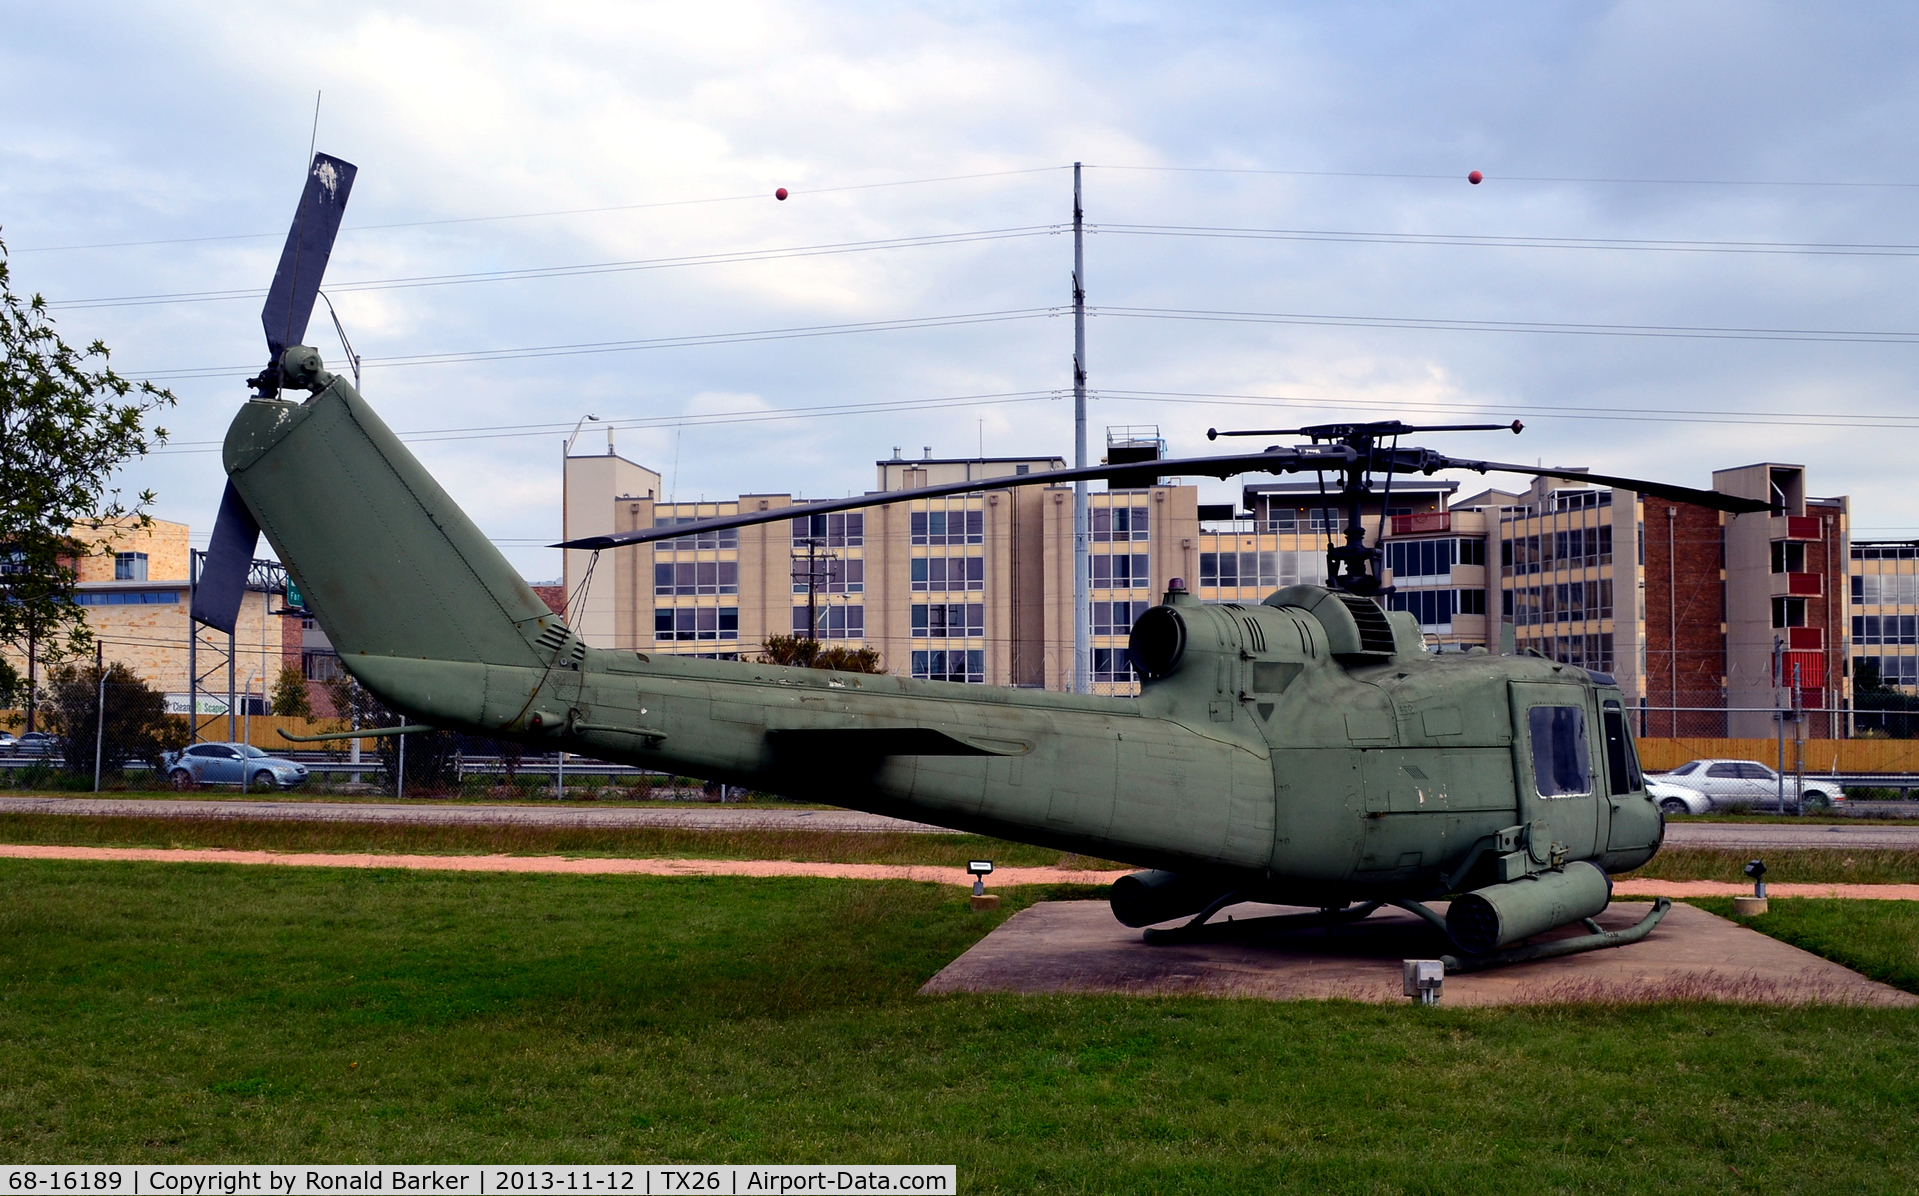 68-16189, 1968 Bell UH-1H Iroquois C/N 10848, UH-1H Camp Mabry, TX (believed UH-1M Admin)